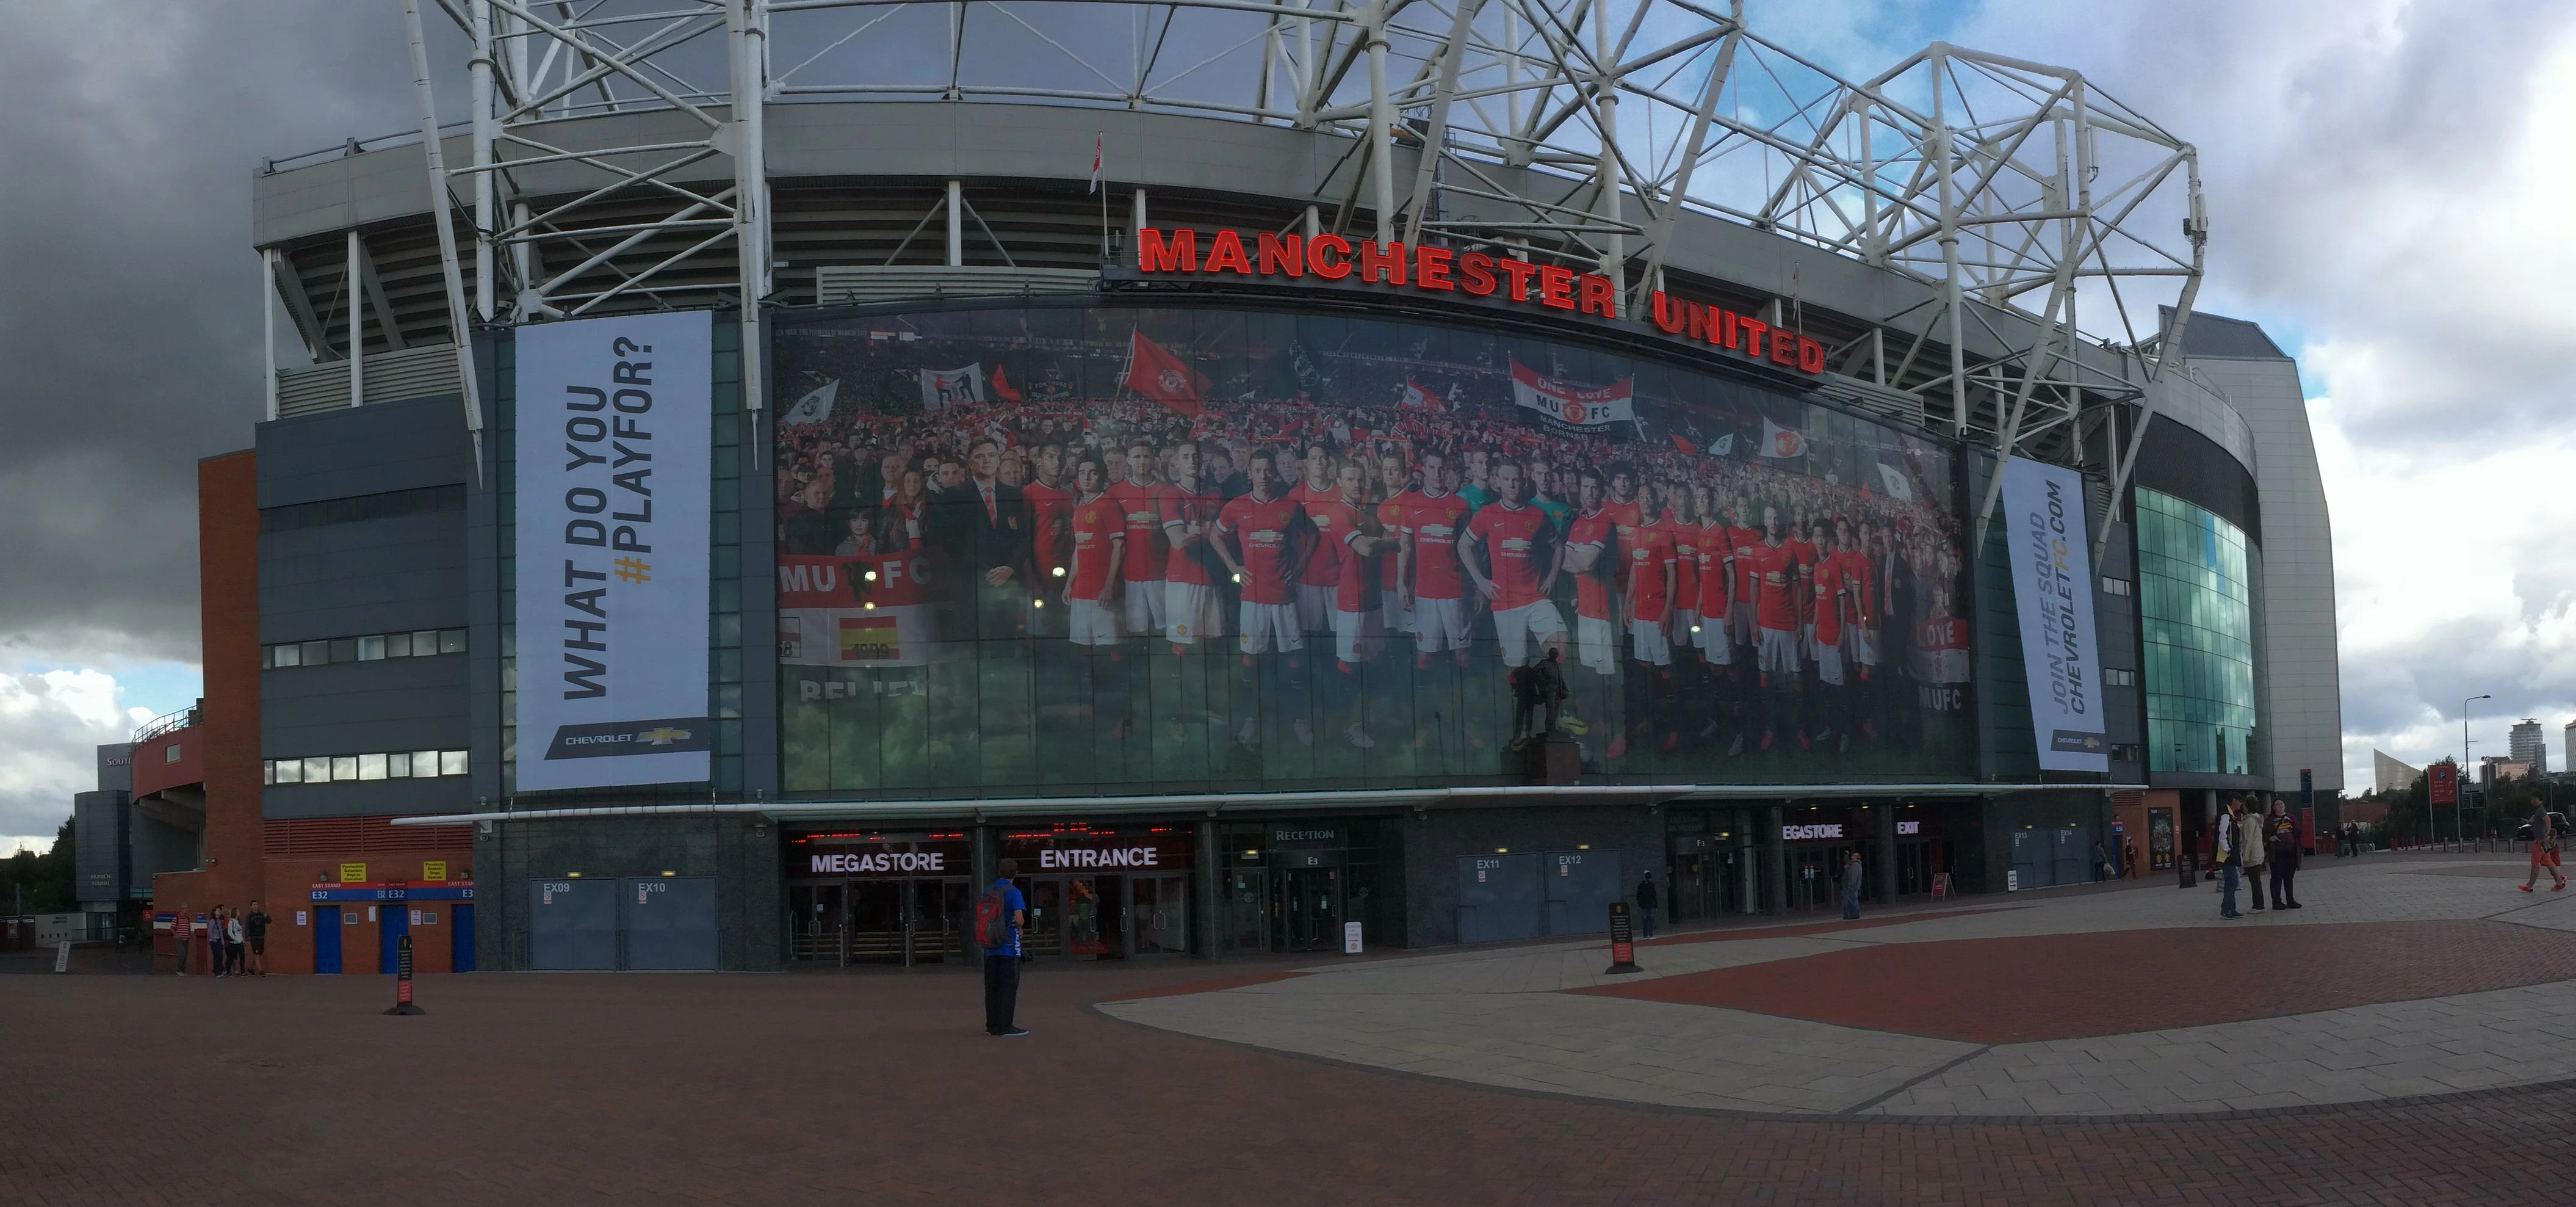 Old Trafford From The Outside